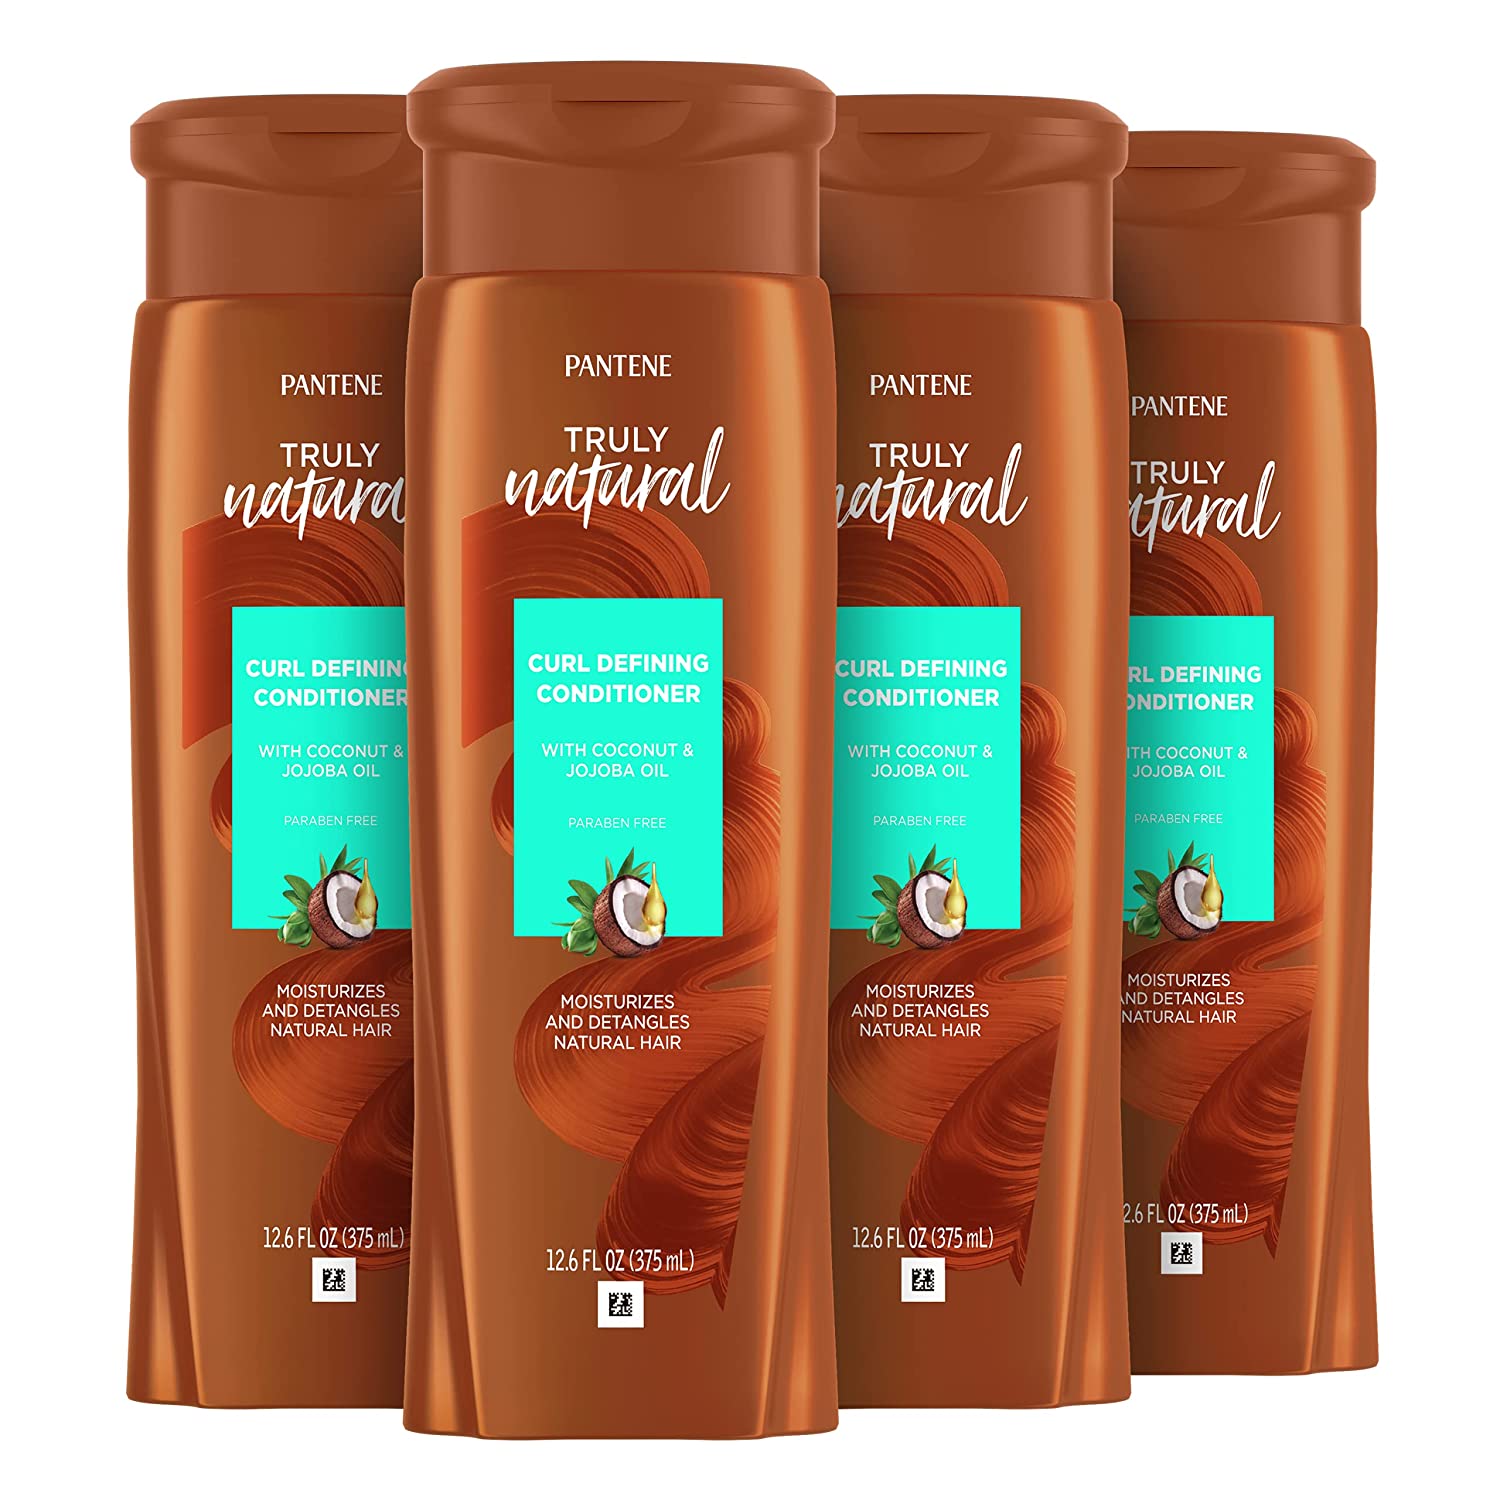 4-Pack 12.60-Oz Pantene Curl Defining Conditioner w/ Coconut & Jojoba Oil $7.95 + Free Shipping w/ Prime or on orders $25+